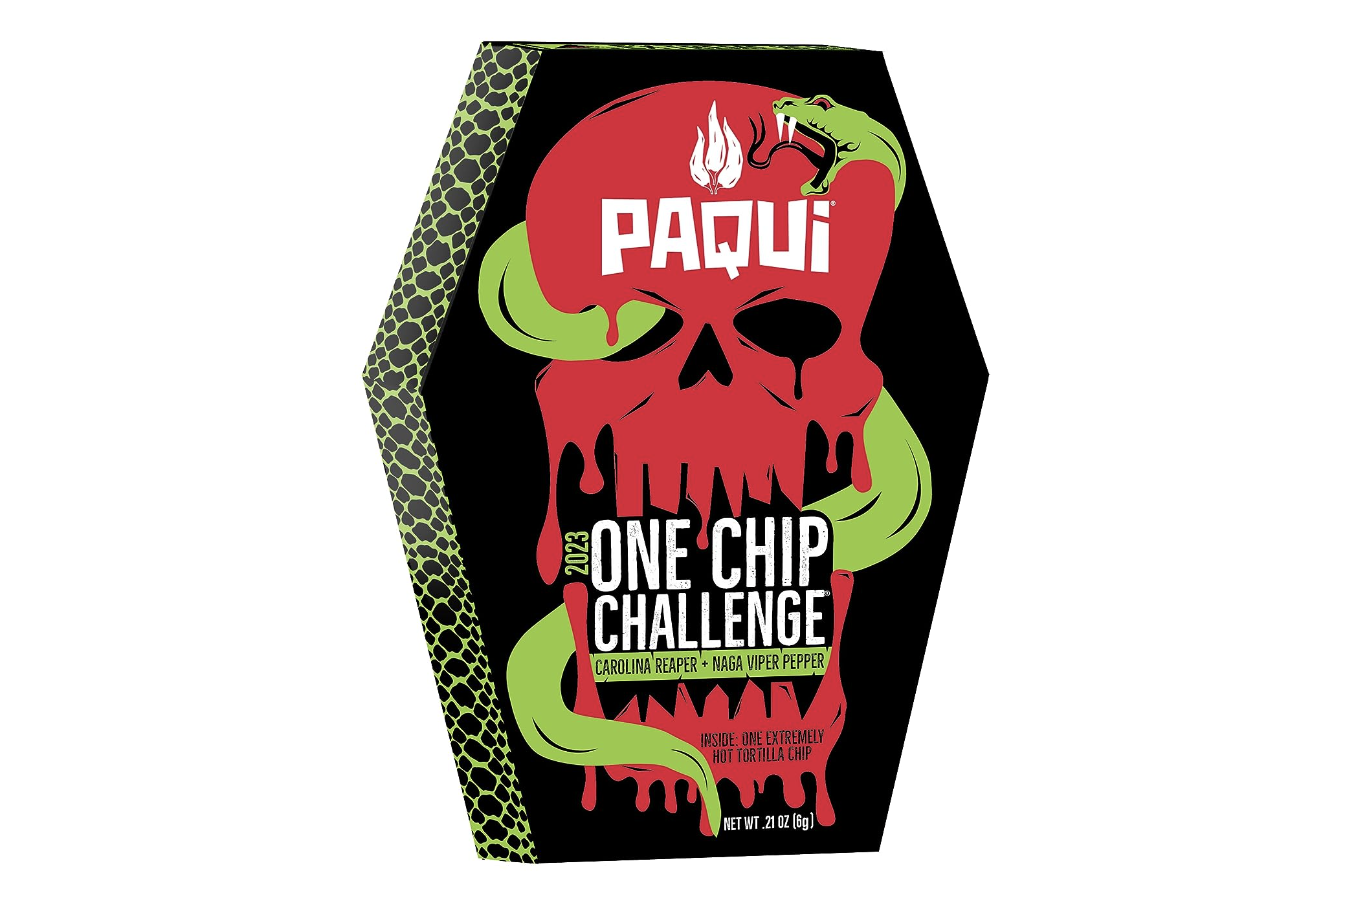 Maker of the spicy 'One Chip Challenge' pulls product from store shelves